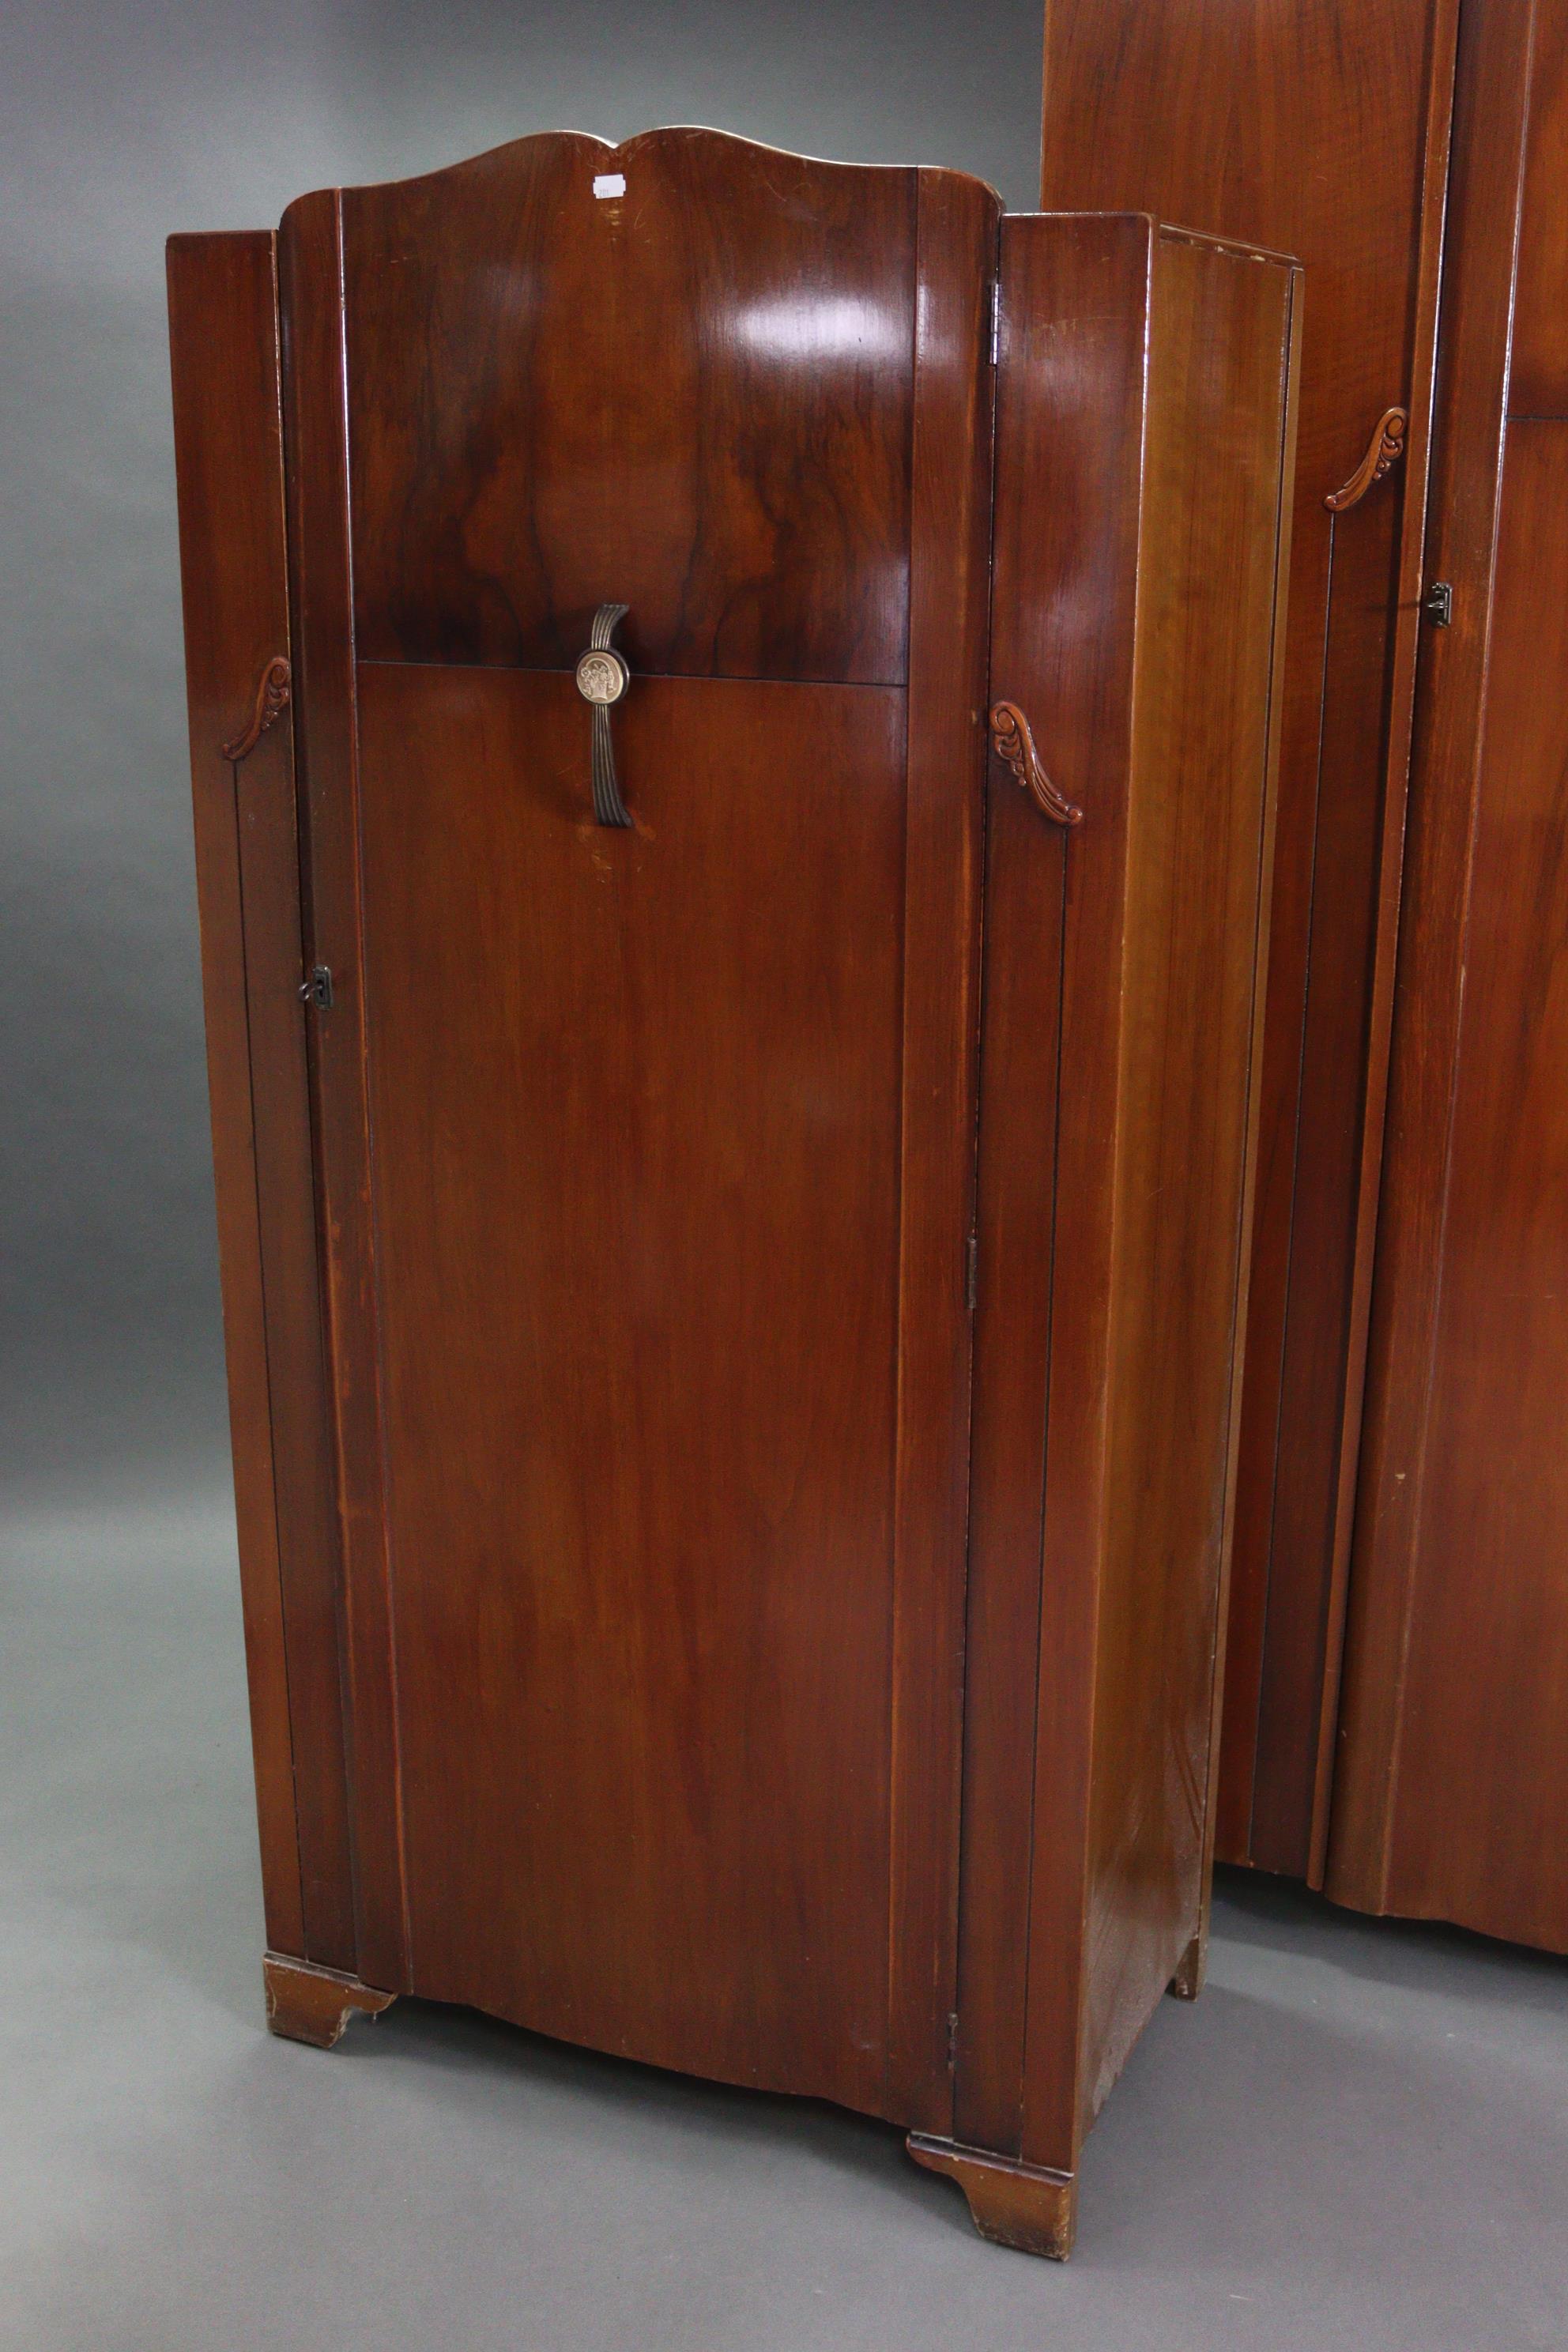 A 1960’s Lebus walnut-finish four-piece bedroom suite comprising a single-door wardrobe, 48” wide - Image 10 of 11